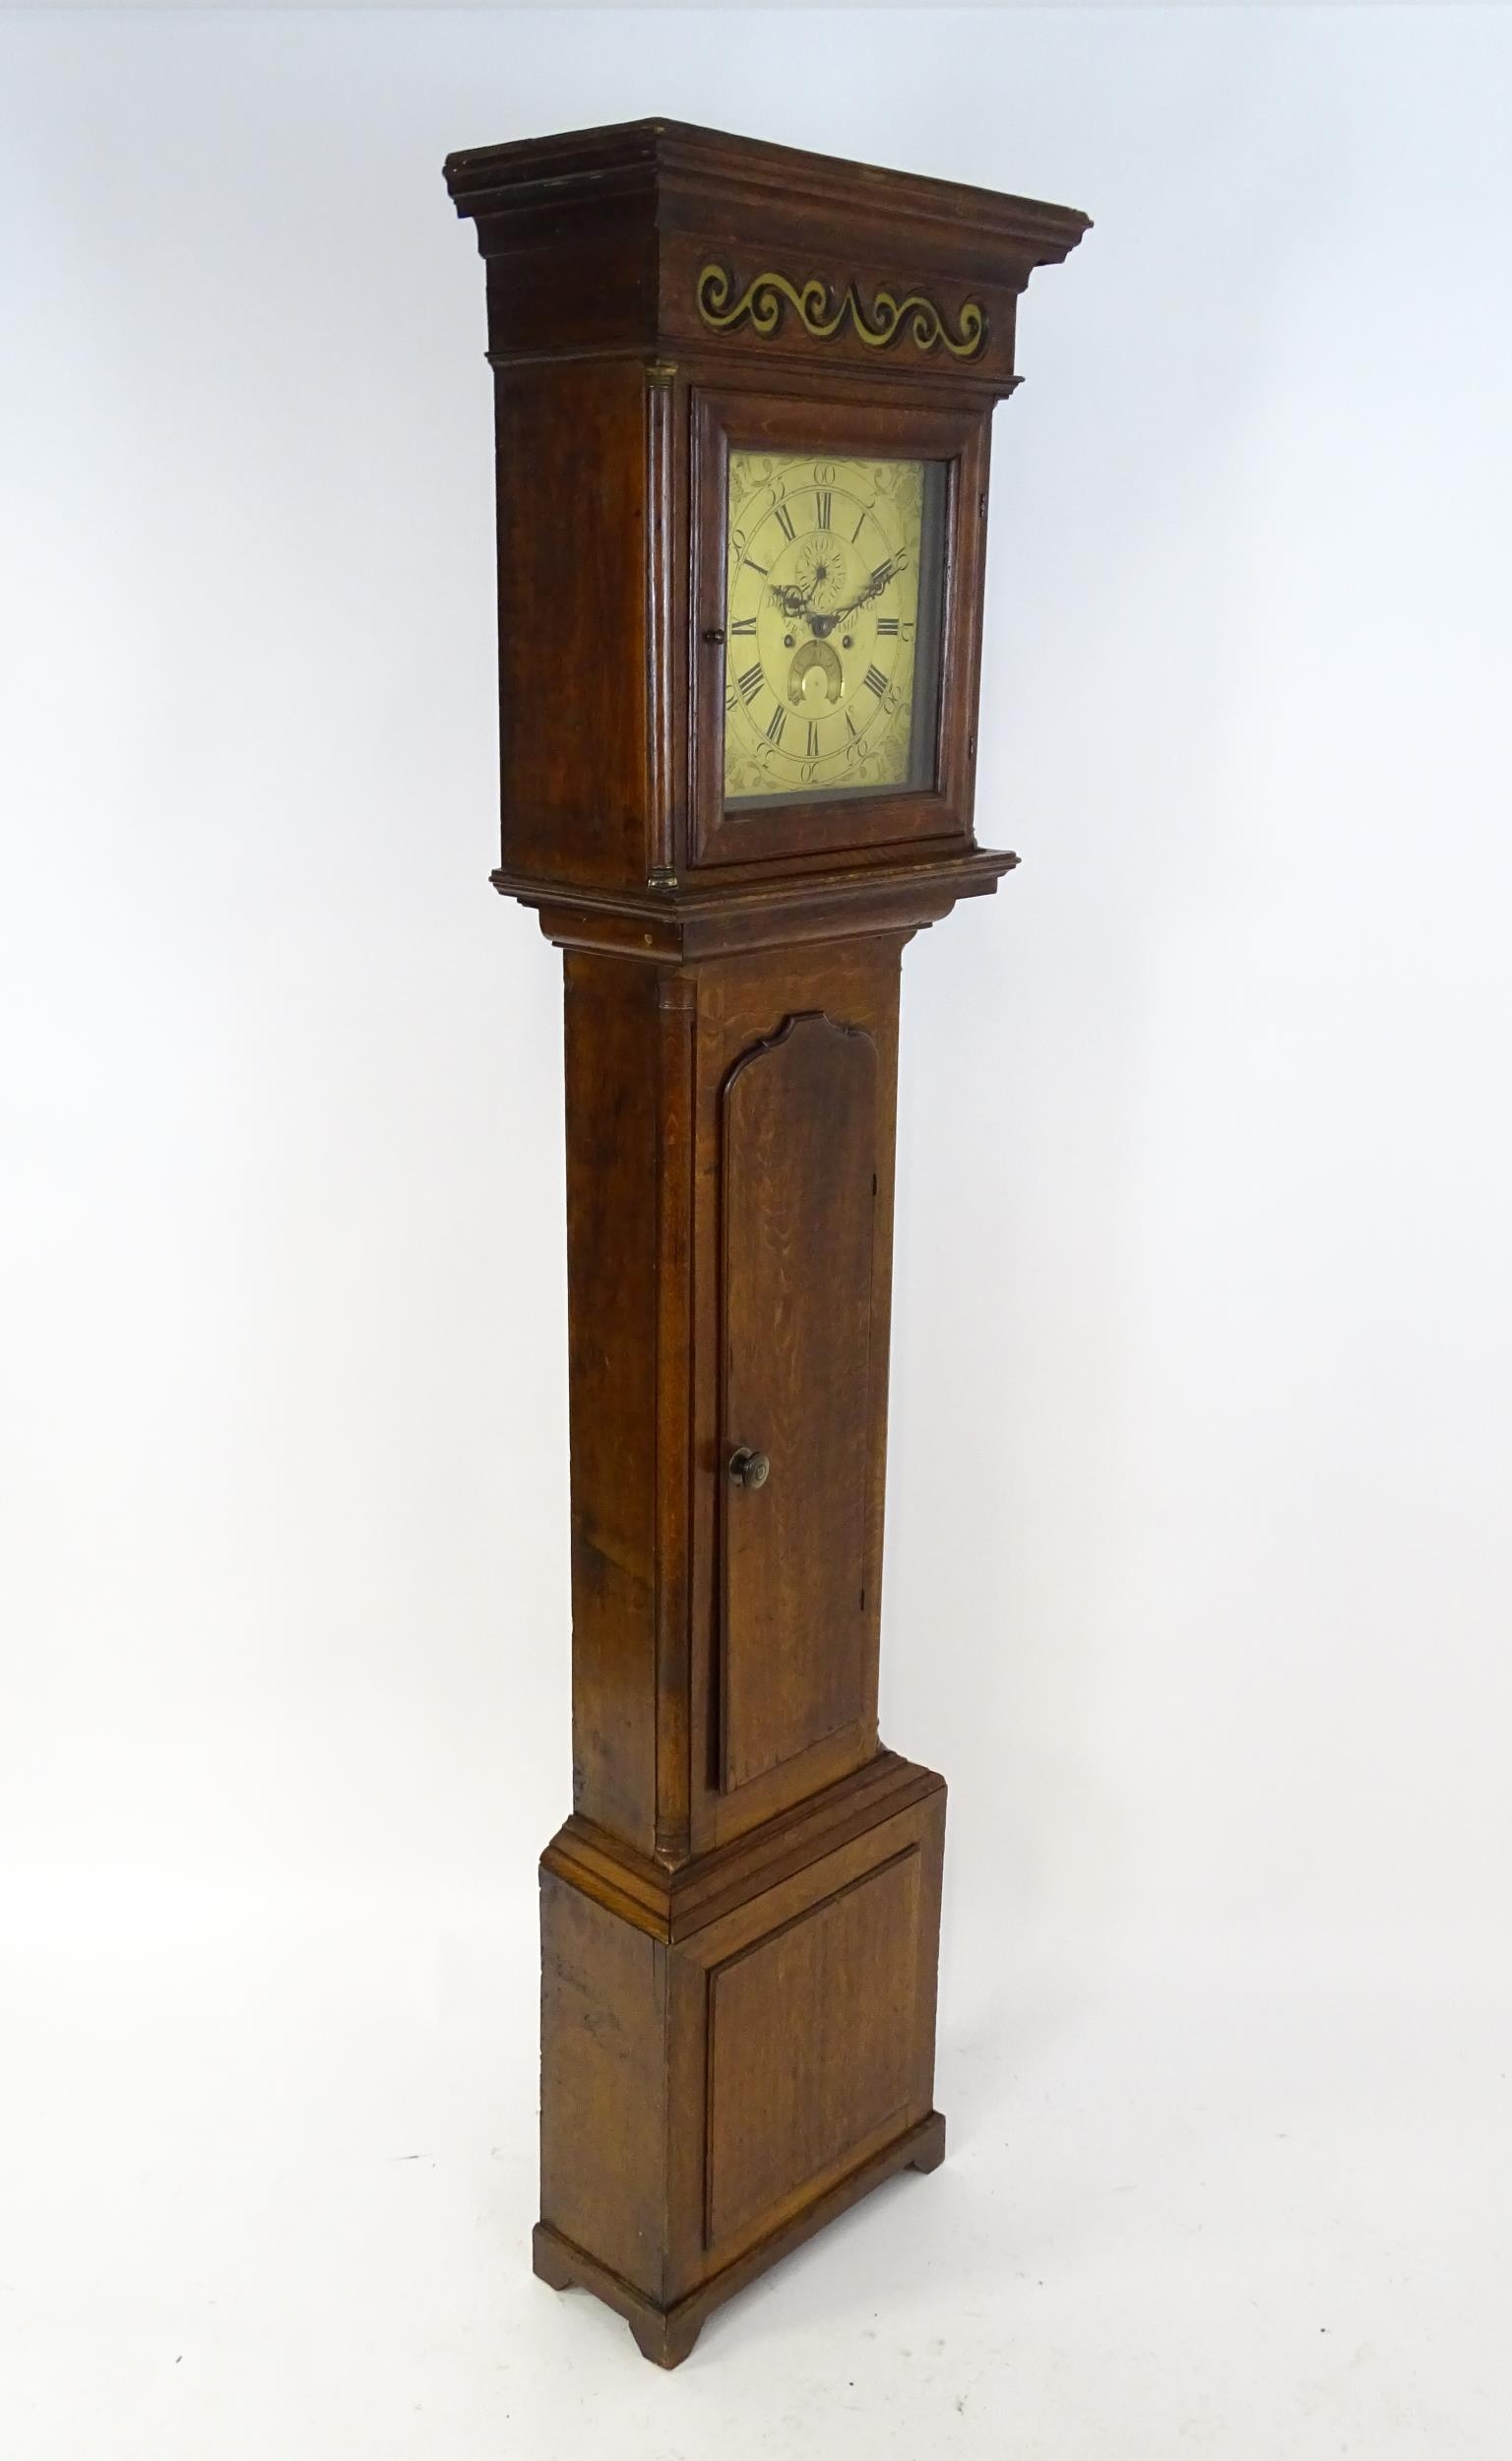 Dickerson, Framlingham : An oak cased 8-day longcase clock with brass face having Roman numerals and - Image 3 of 14